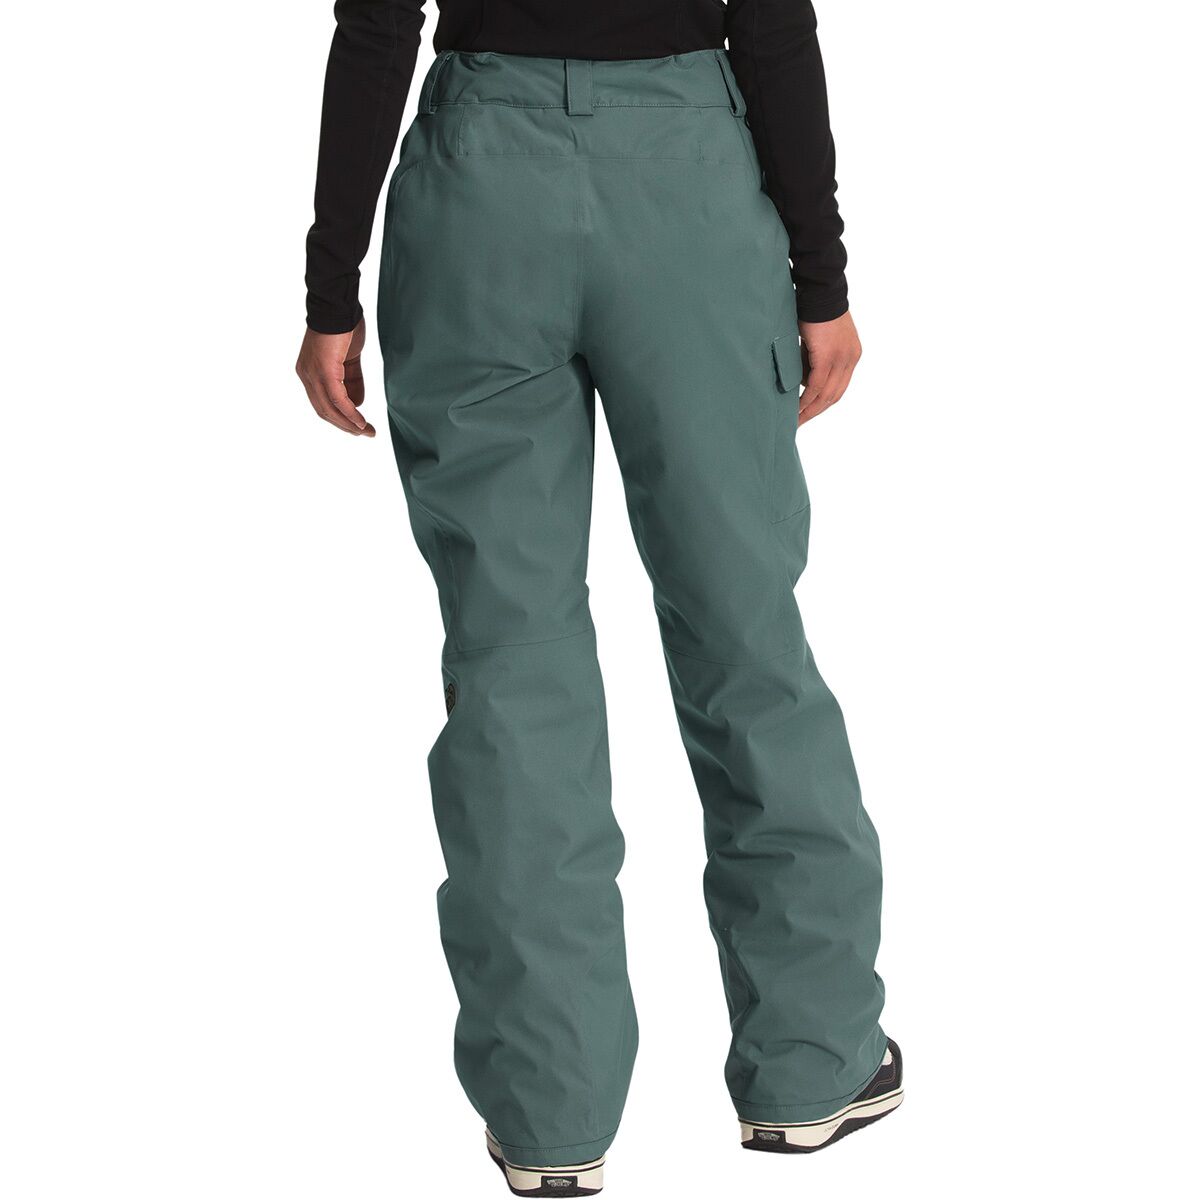 Women's Freedom Pant Insulated - TNF Black - Ramsey Outdoor